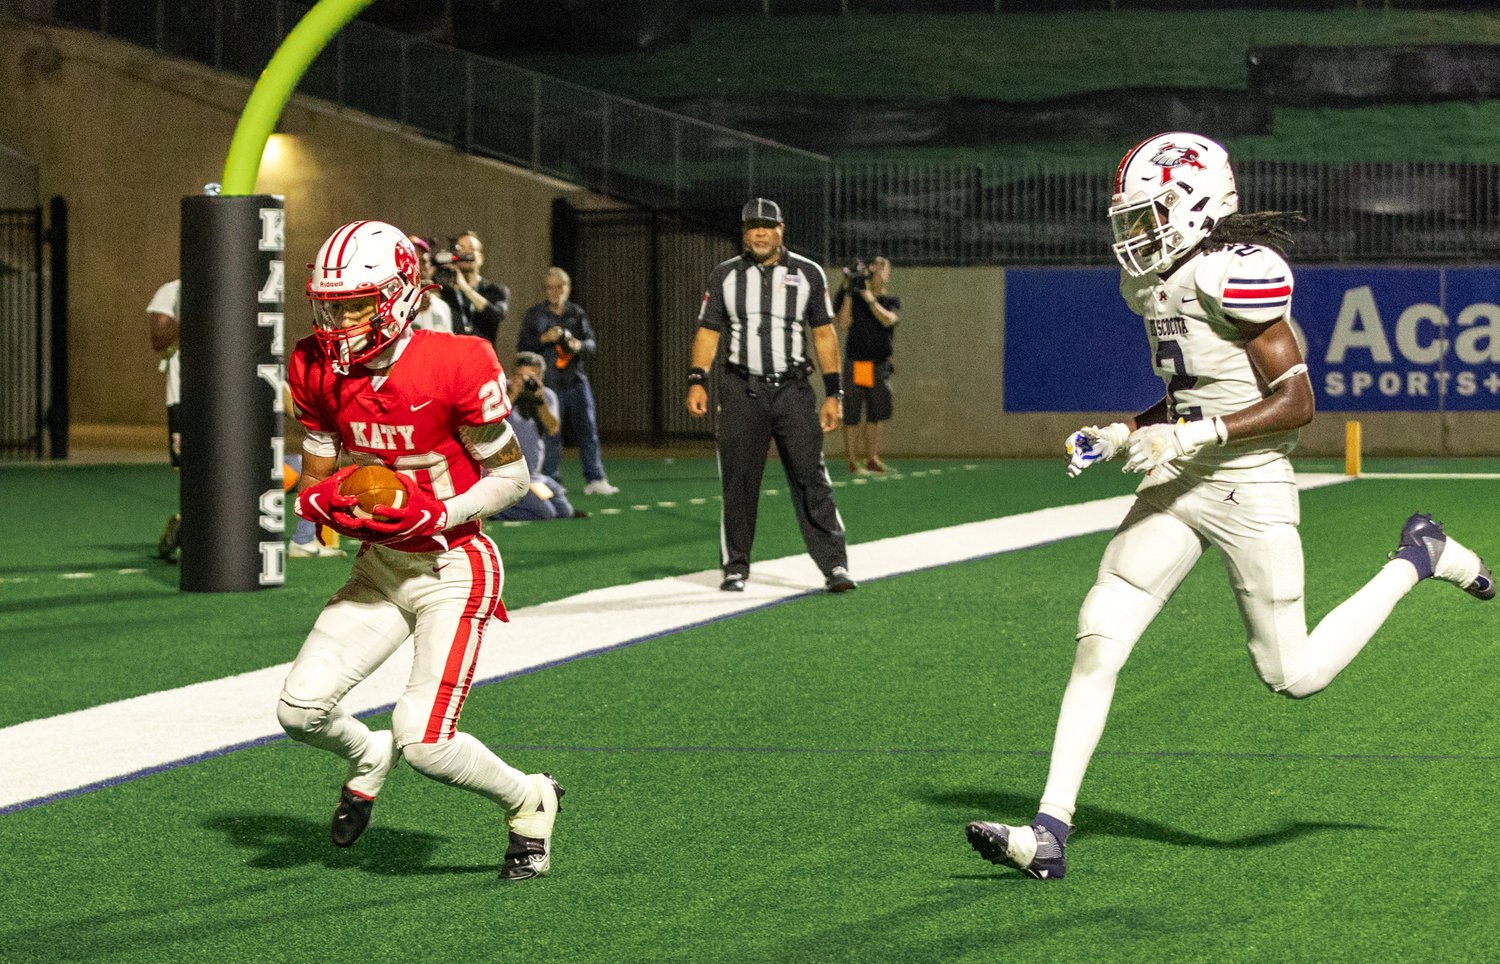 Katy’s Micah Koenig catches a touchdown pass during Friday’s game between Katy and Atascocita at Legacy Stadium.